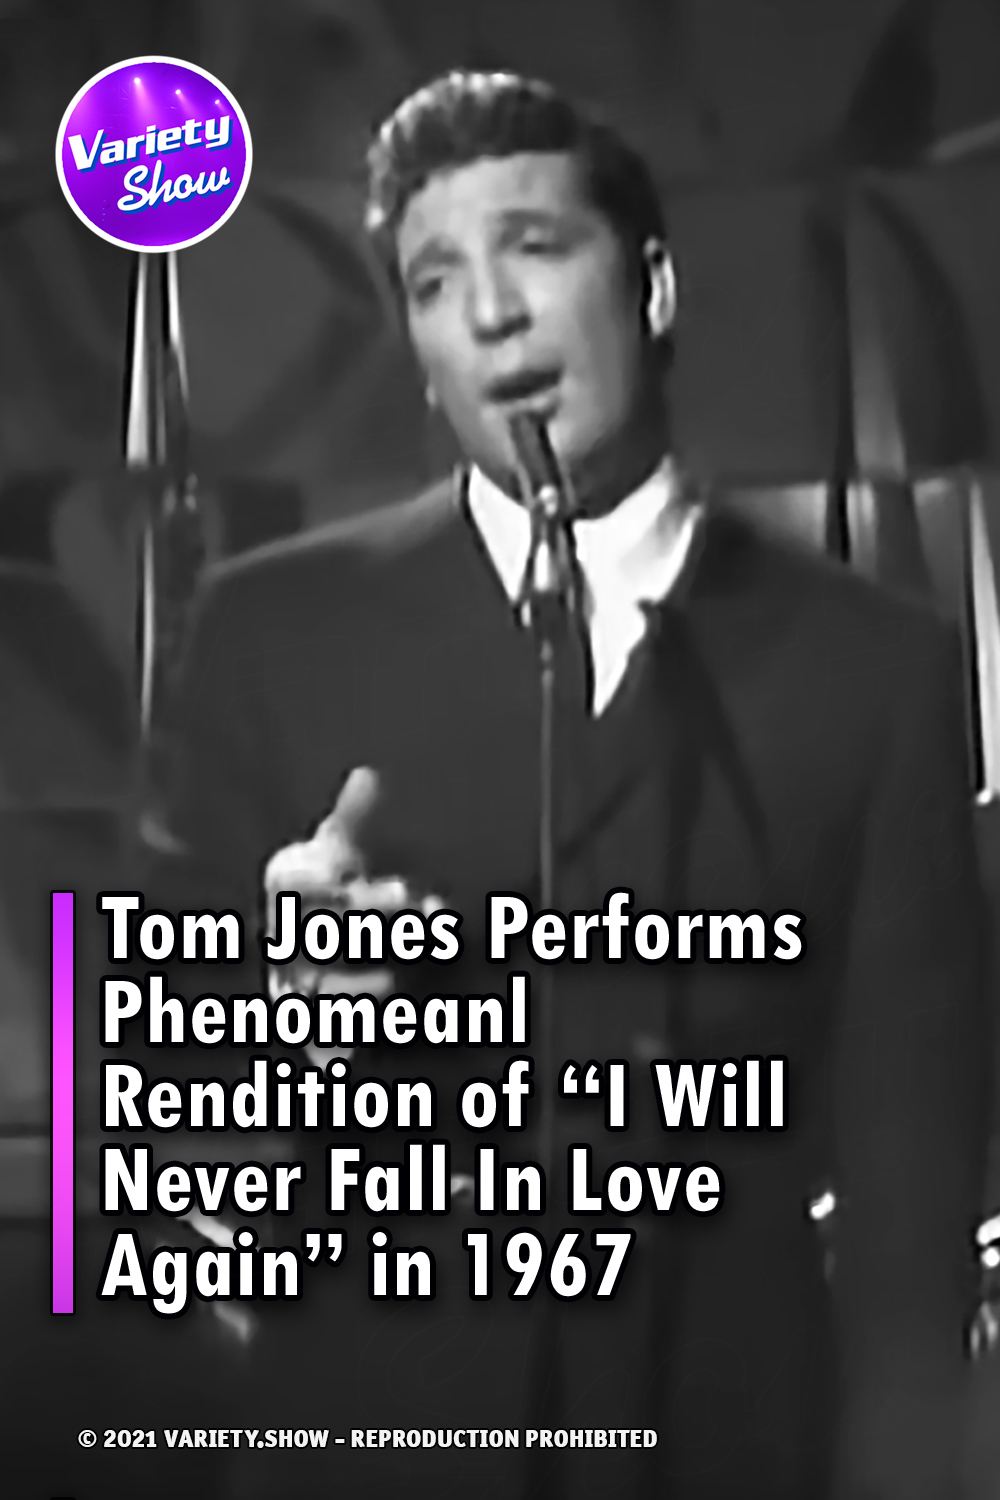 Tom Jones Performs Phenomeanl Rendition of “I Will Never Fall In Love Again” in 1967